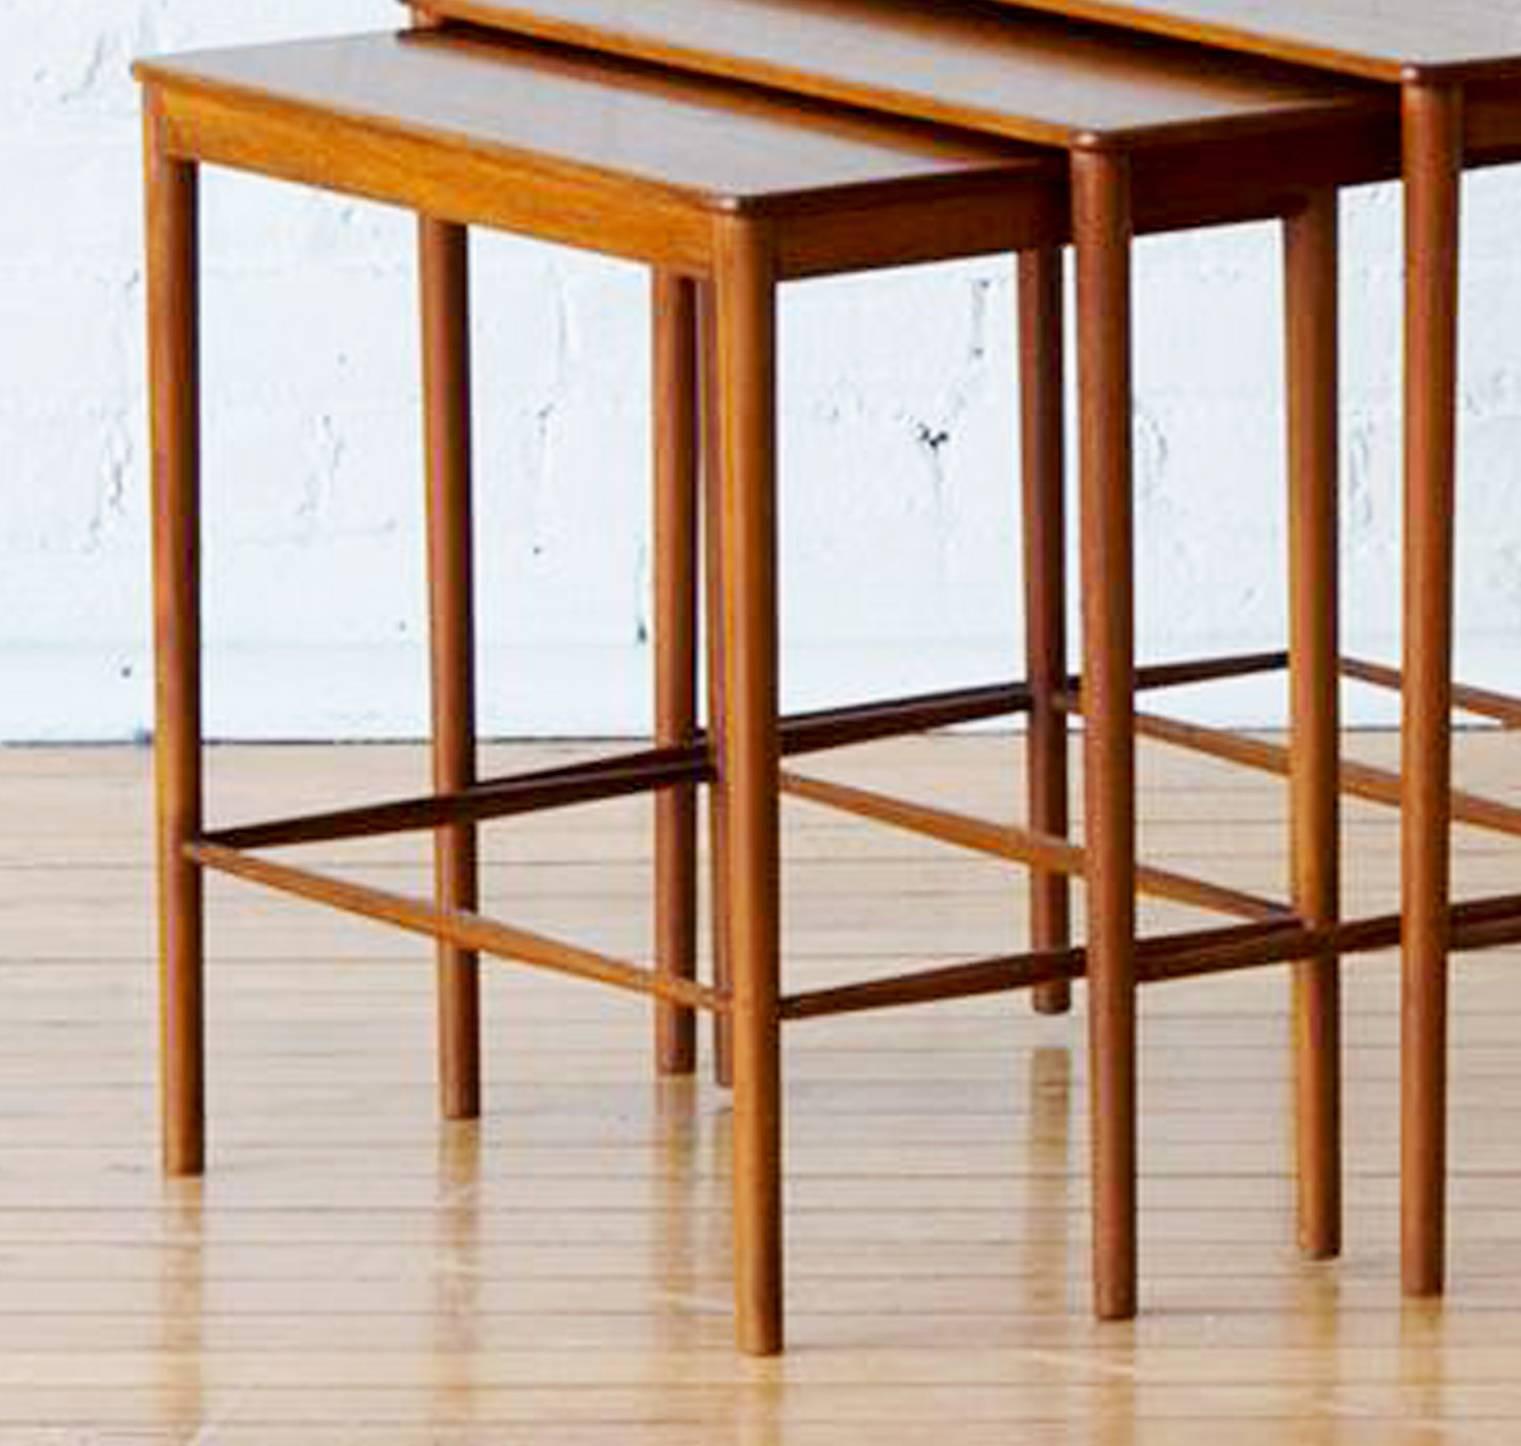 Set of Scandinavian midcentury teak nesting tables, 
Grete Jalk for P. Jeppesens Møbelsnedkeri, 
Denmark,
circa 1970.

A set of three tables in teak wood.

Dimensions: 19 1/2 inches x 22 1/2 inches x 14 1/2 inches.